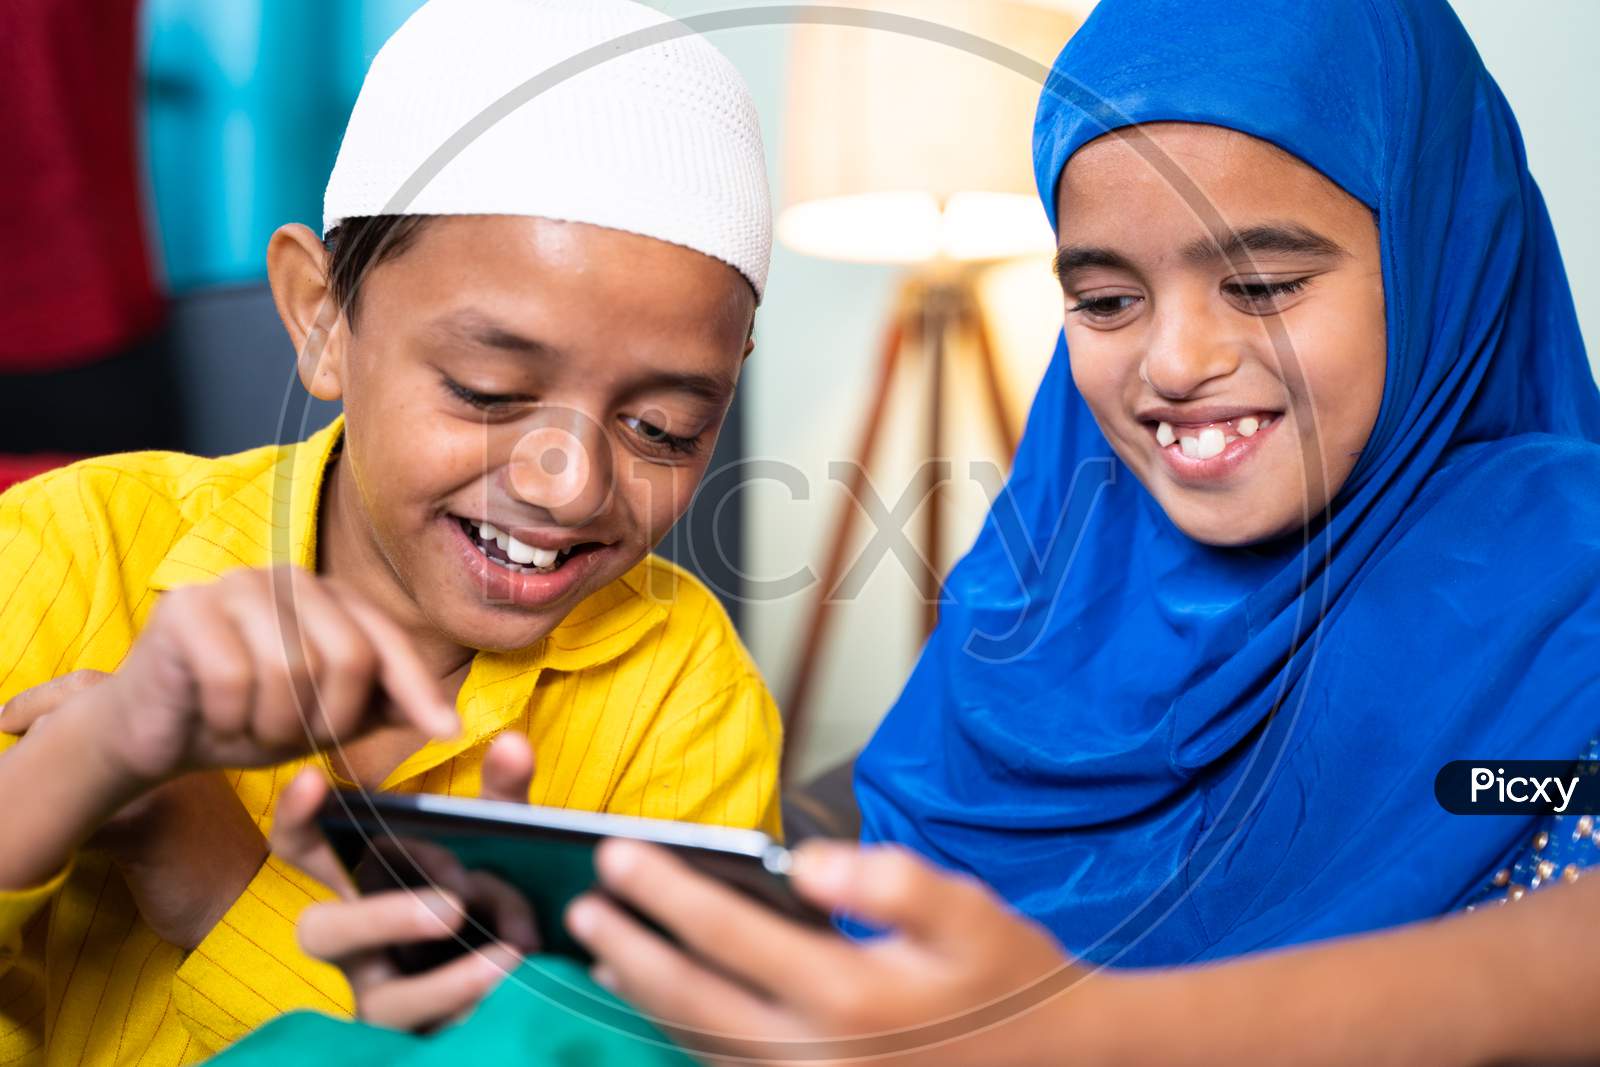 Two Muslim Sibling Kids Busy Using Mobile At Home - Concept Of Kids Using Technology, Internet And Social Media.